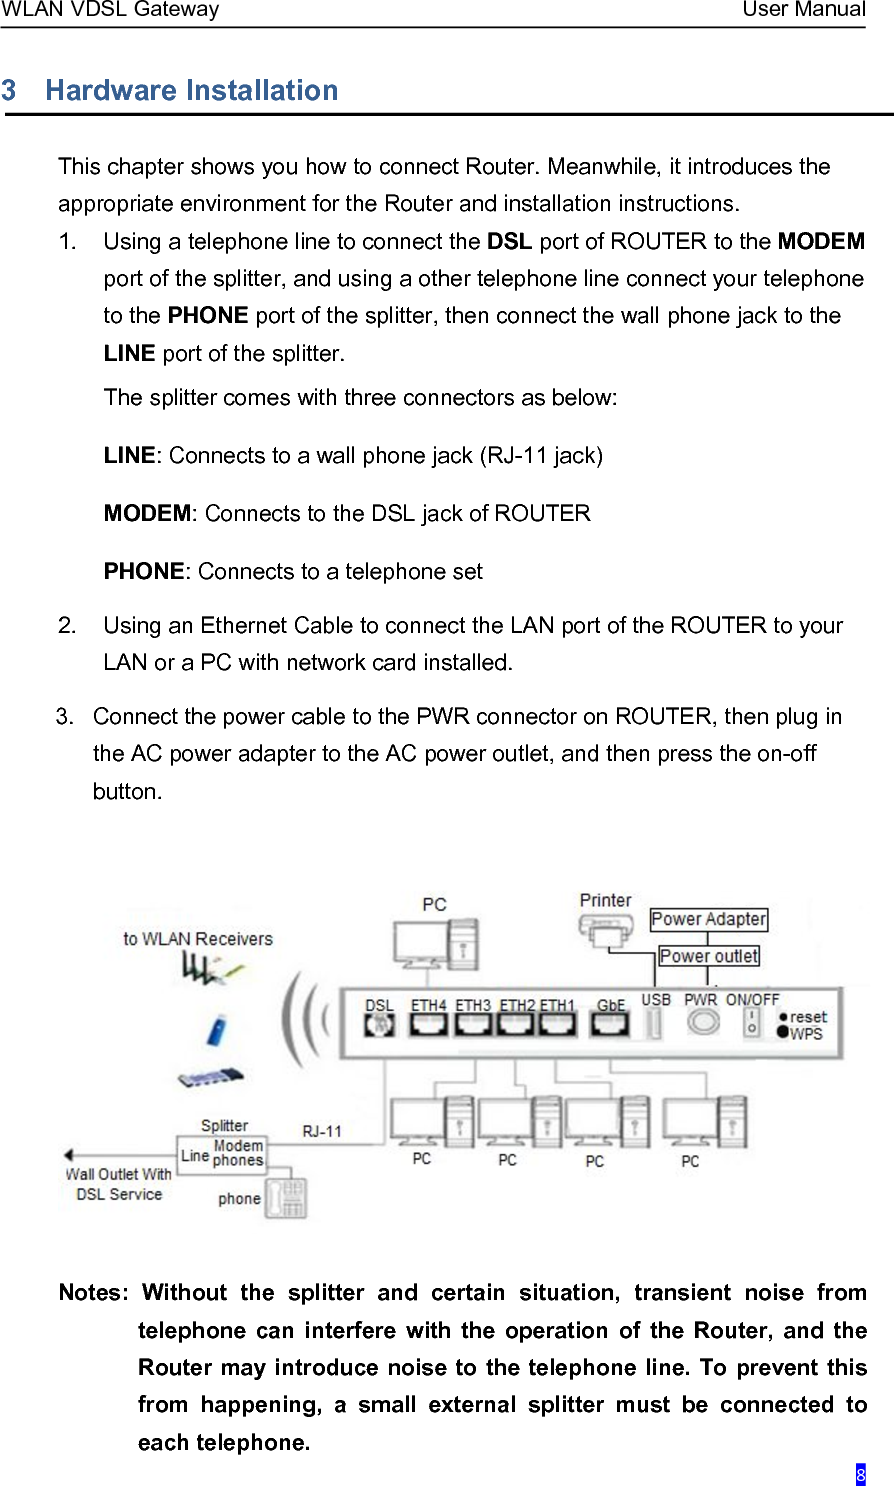 WLAN VDSL Gateway User Manual83 Hardware InstallationThis chapter shows you how to connect Router. Meanwhile, it introduces theappropriate environment for the Router and installation instructions.1. Using a telephone line to connect the DSL port of ROUTER to the MODEMport of the splitter, and using a other telephone line connect your telephoneto the PHONE port of the splitter, then connect the wall phone jack to theLINE port of the splitter.The splitter comes with three connectors as below:LINE: Connects to a wall phone jack (RJ-11 jack)MODEM: Connects to the DSL jack of ROUTERPHONE: Connects to a telephone set2. Using an Ethernet Cable to connect the LAN port of the ROUTER to yourLAN or a PC with network card installed.3. Connect the power cable to the PWR connector on ROUTER, then plug inthe AC power adapter to the AC power outlet, and then press the on-offbutton.Notes: Without the splitter and certain situation, transient noise fromtelephone can interfere with the operation of the Router, and theRouter may introduce noise to the telephone line. To prevent thisfrom happening, a small external splitter must be connected toeach telephone.